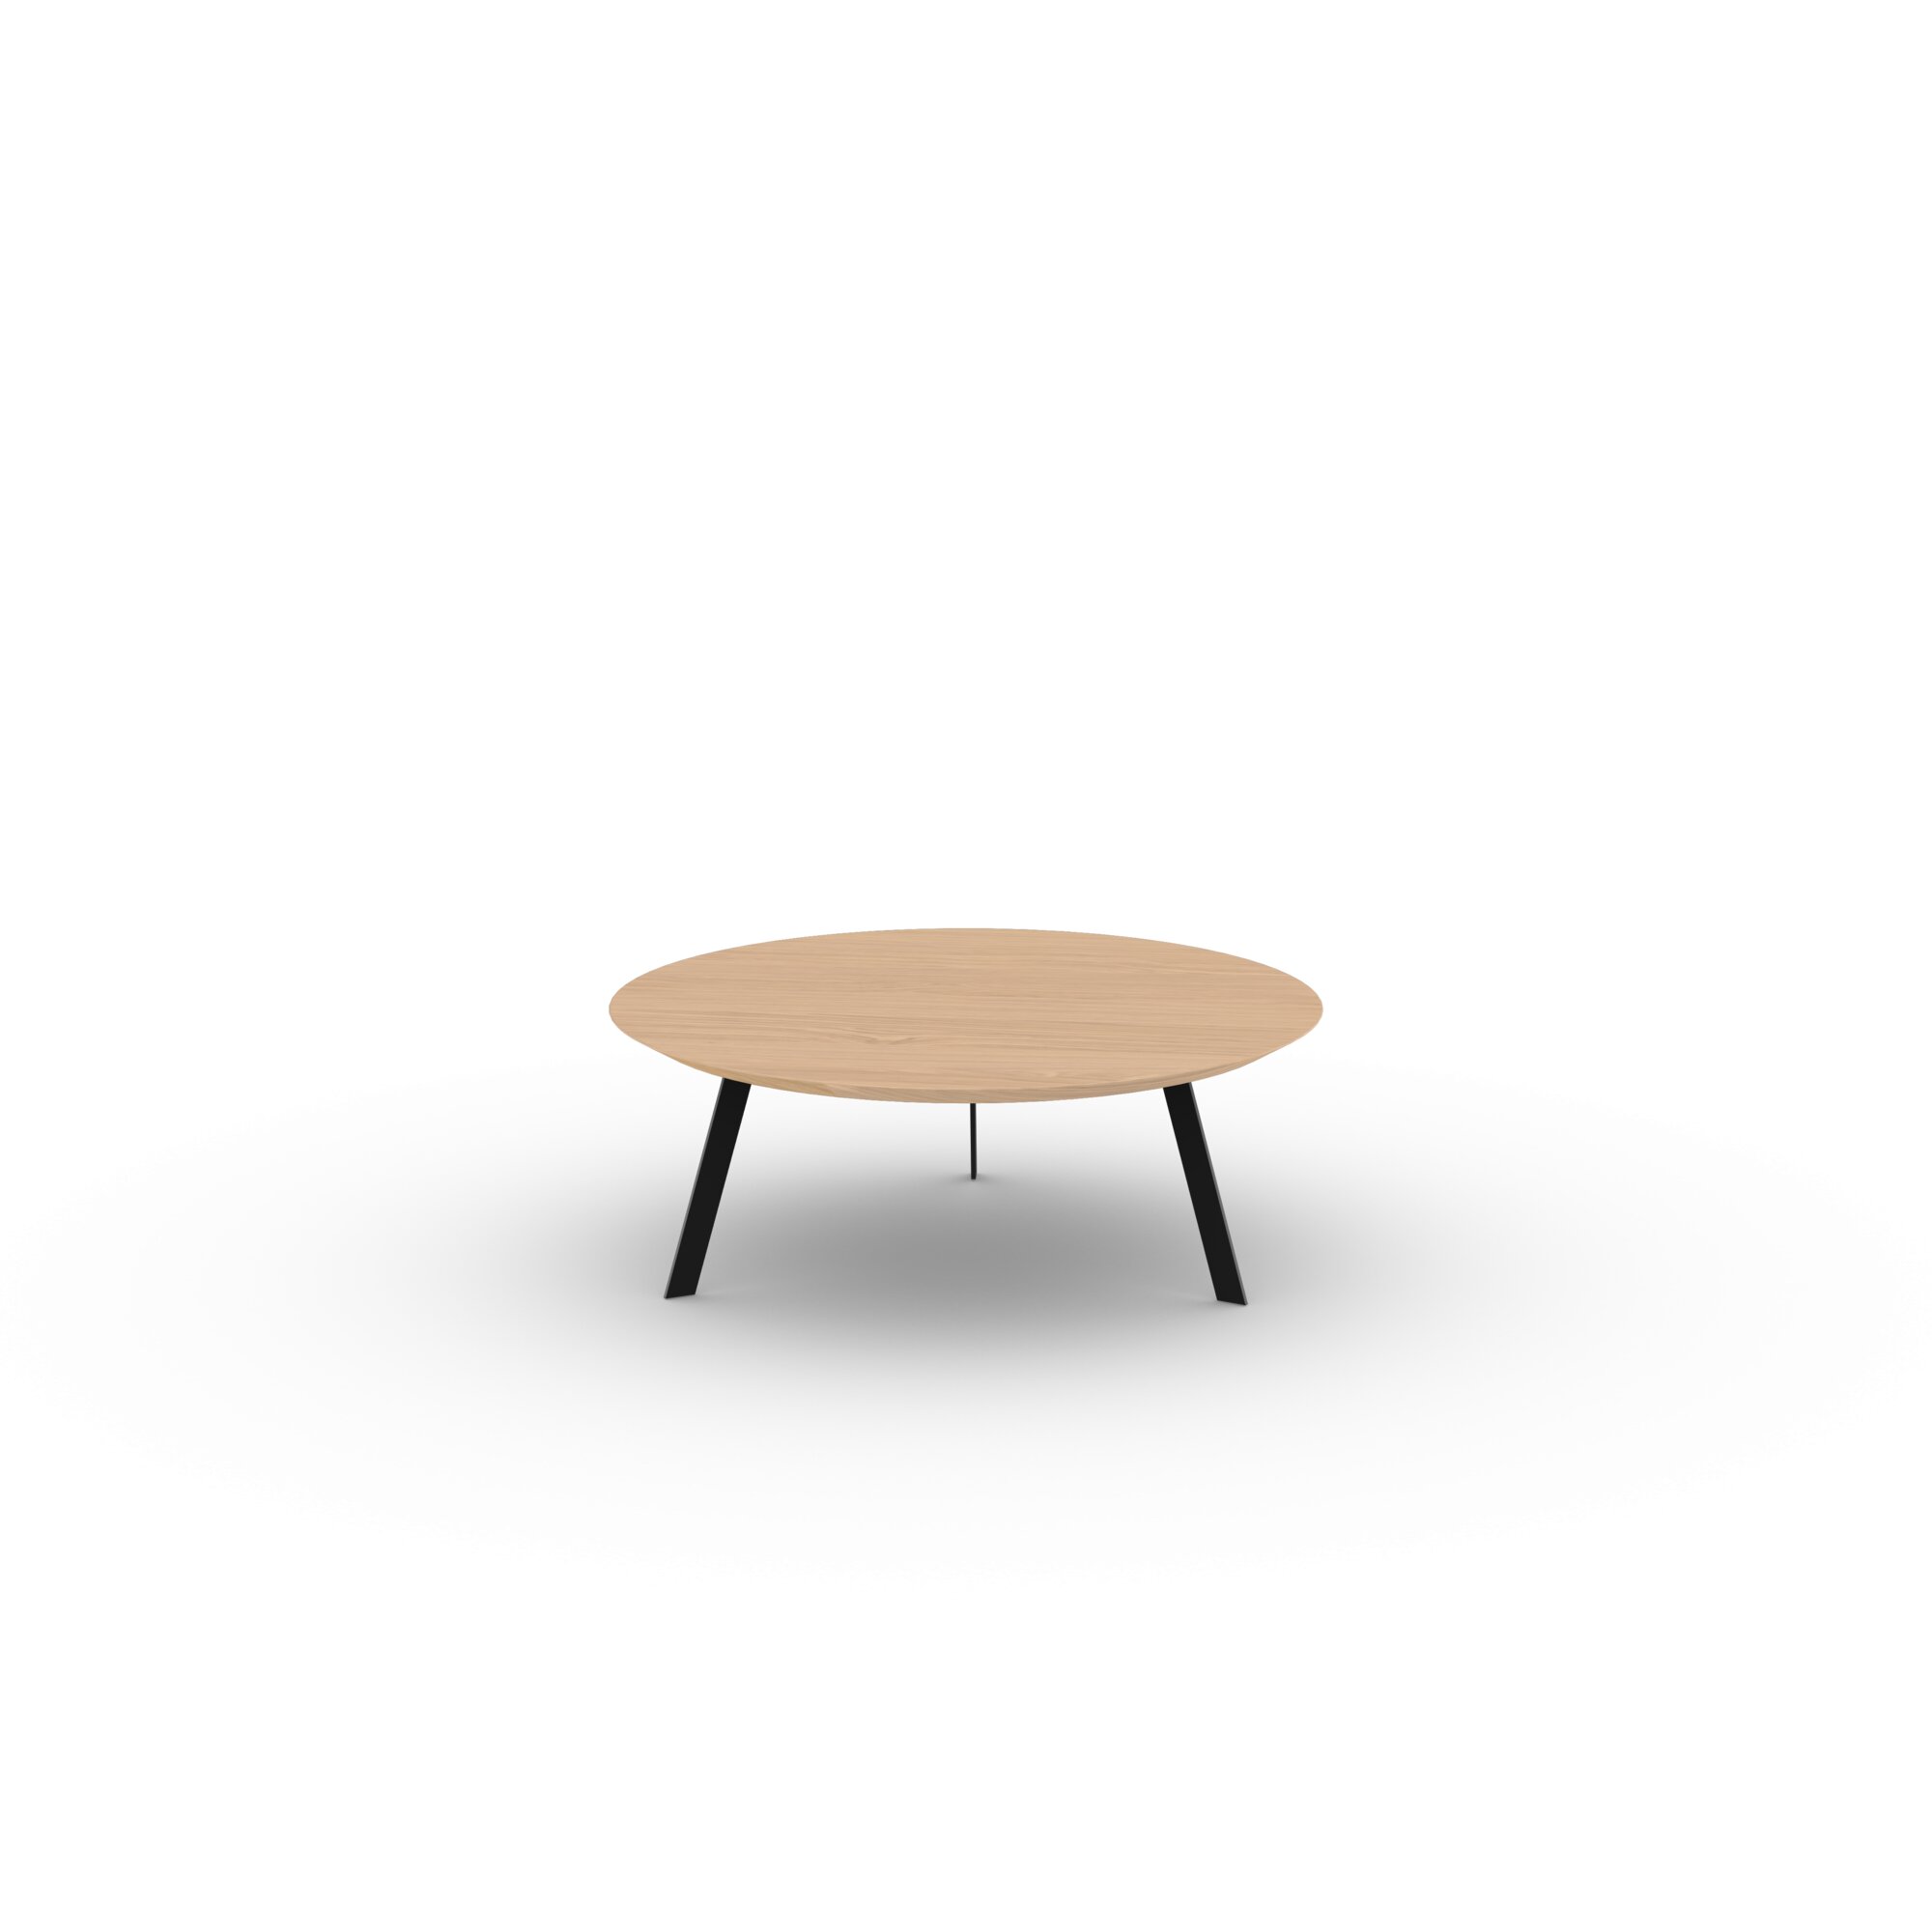 Design Coffee Table | New Co Coffee Table 90 Round Black | Oak hardwax oil natural light 3041 | Studio HENK| 